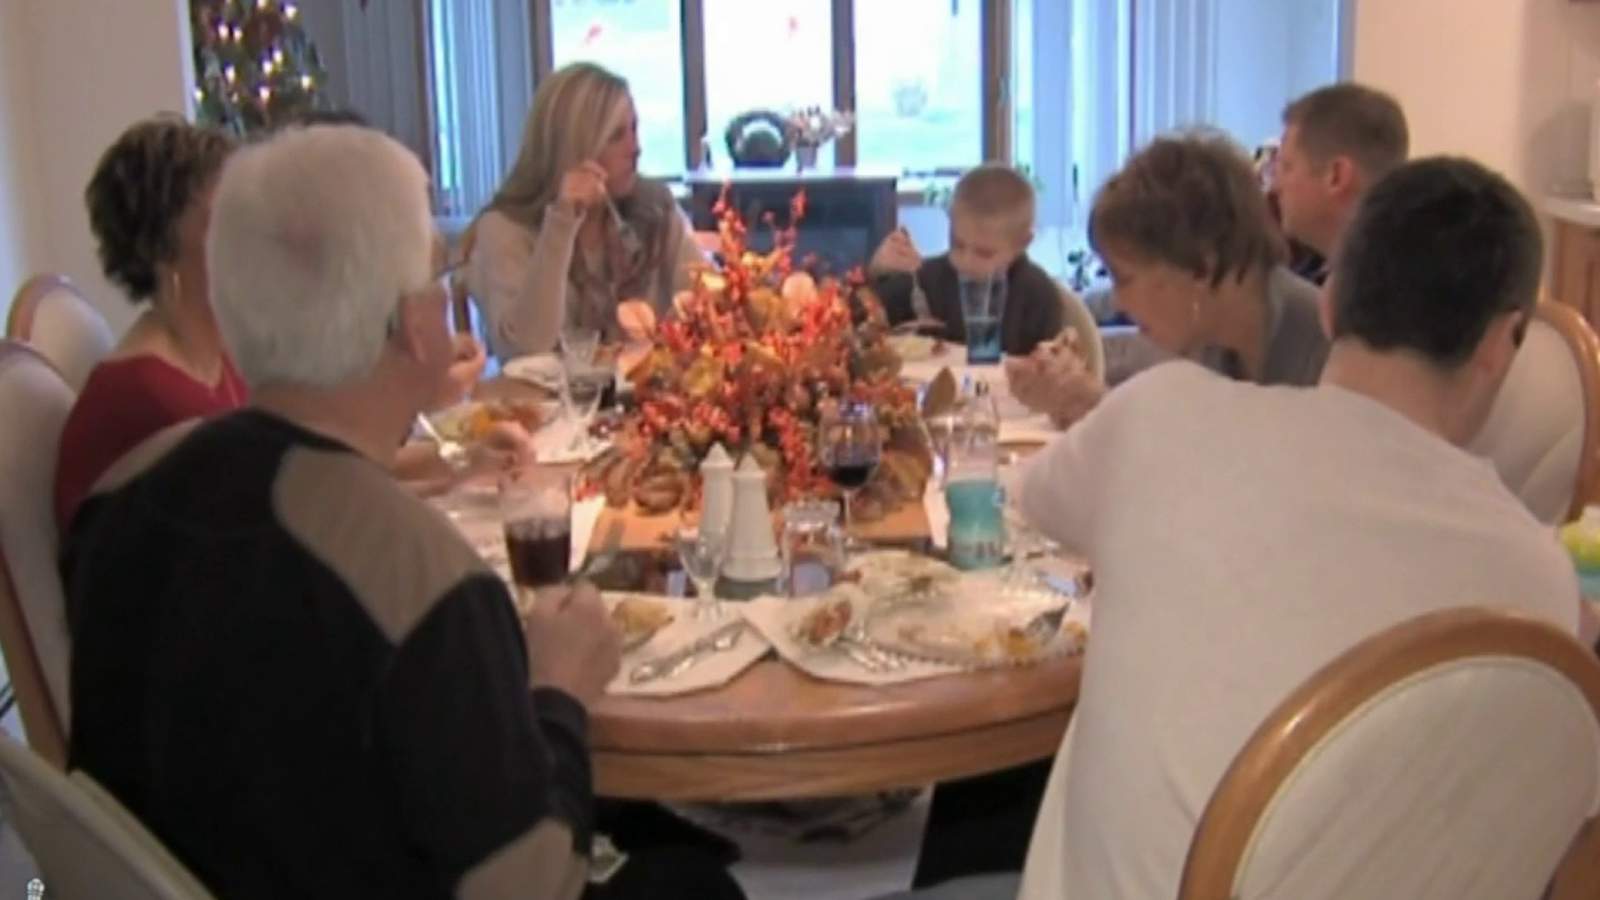 CDC ranks traditional Thanksgiving activities from high to low risk during COVID-19 pandemic - WDIV ClickOnDetroit